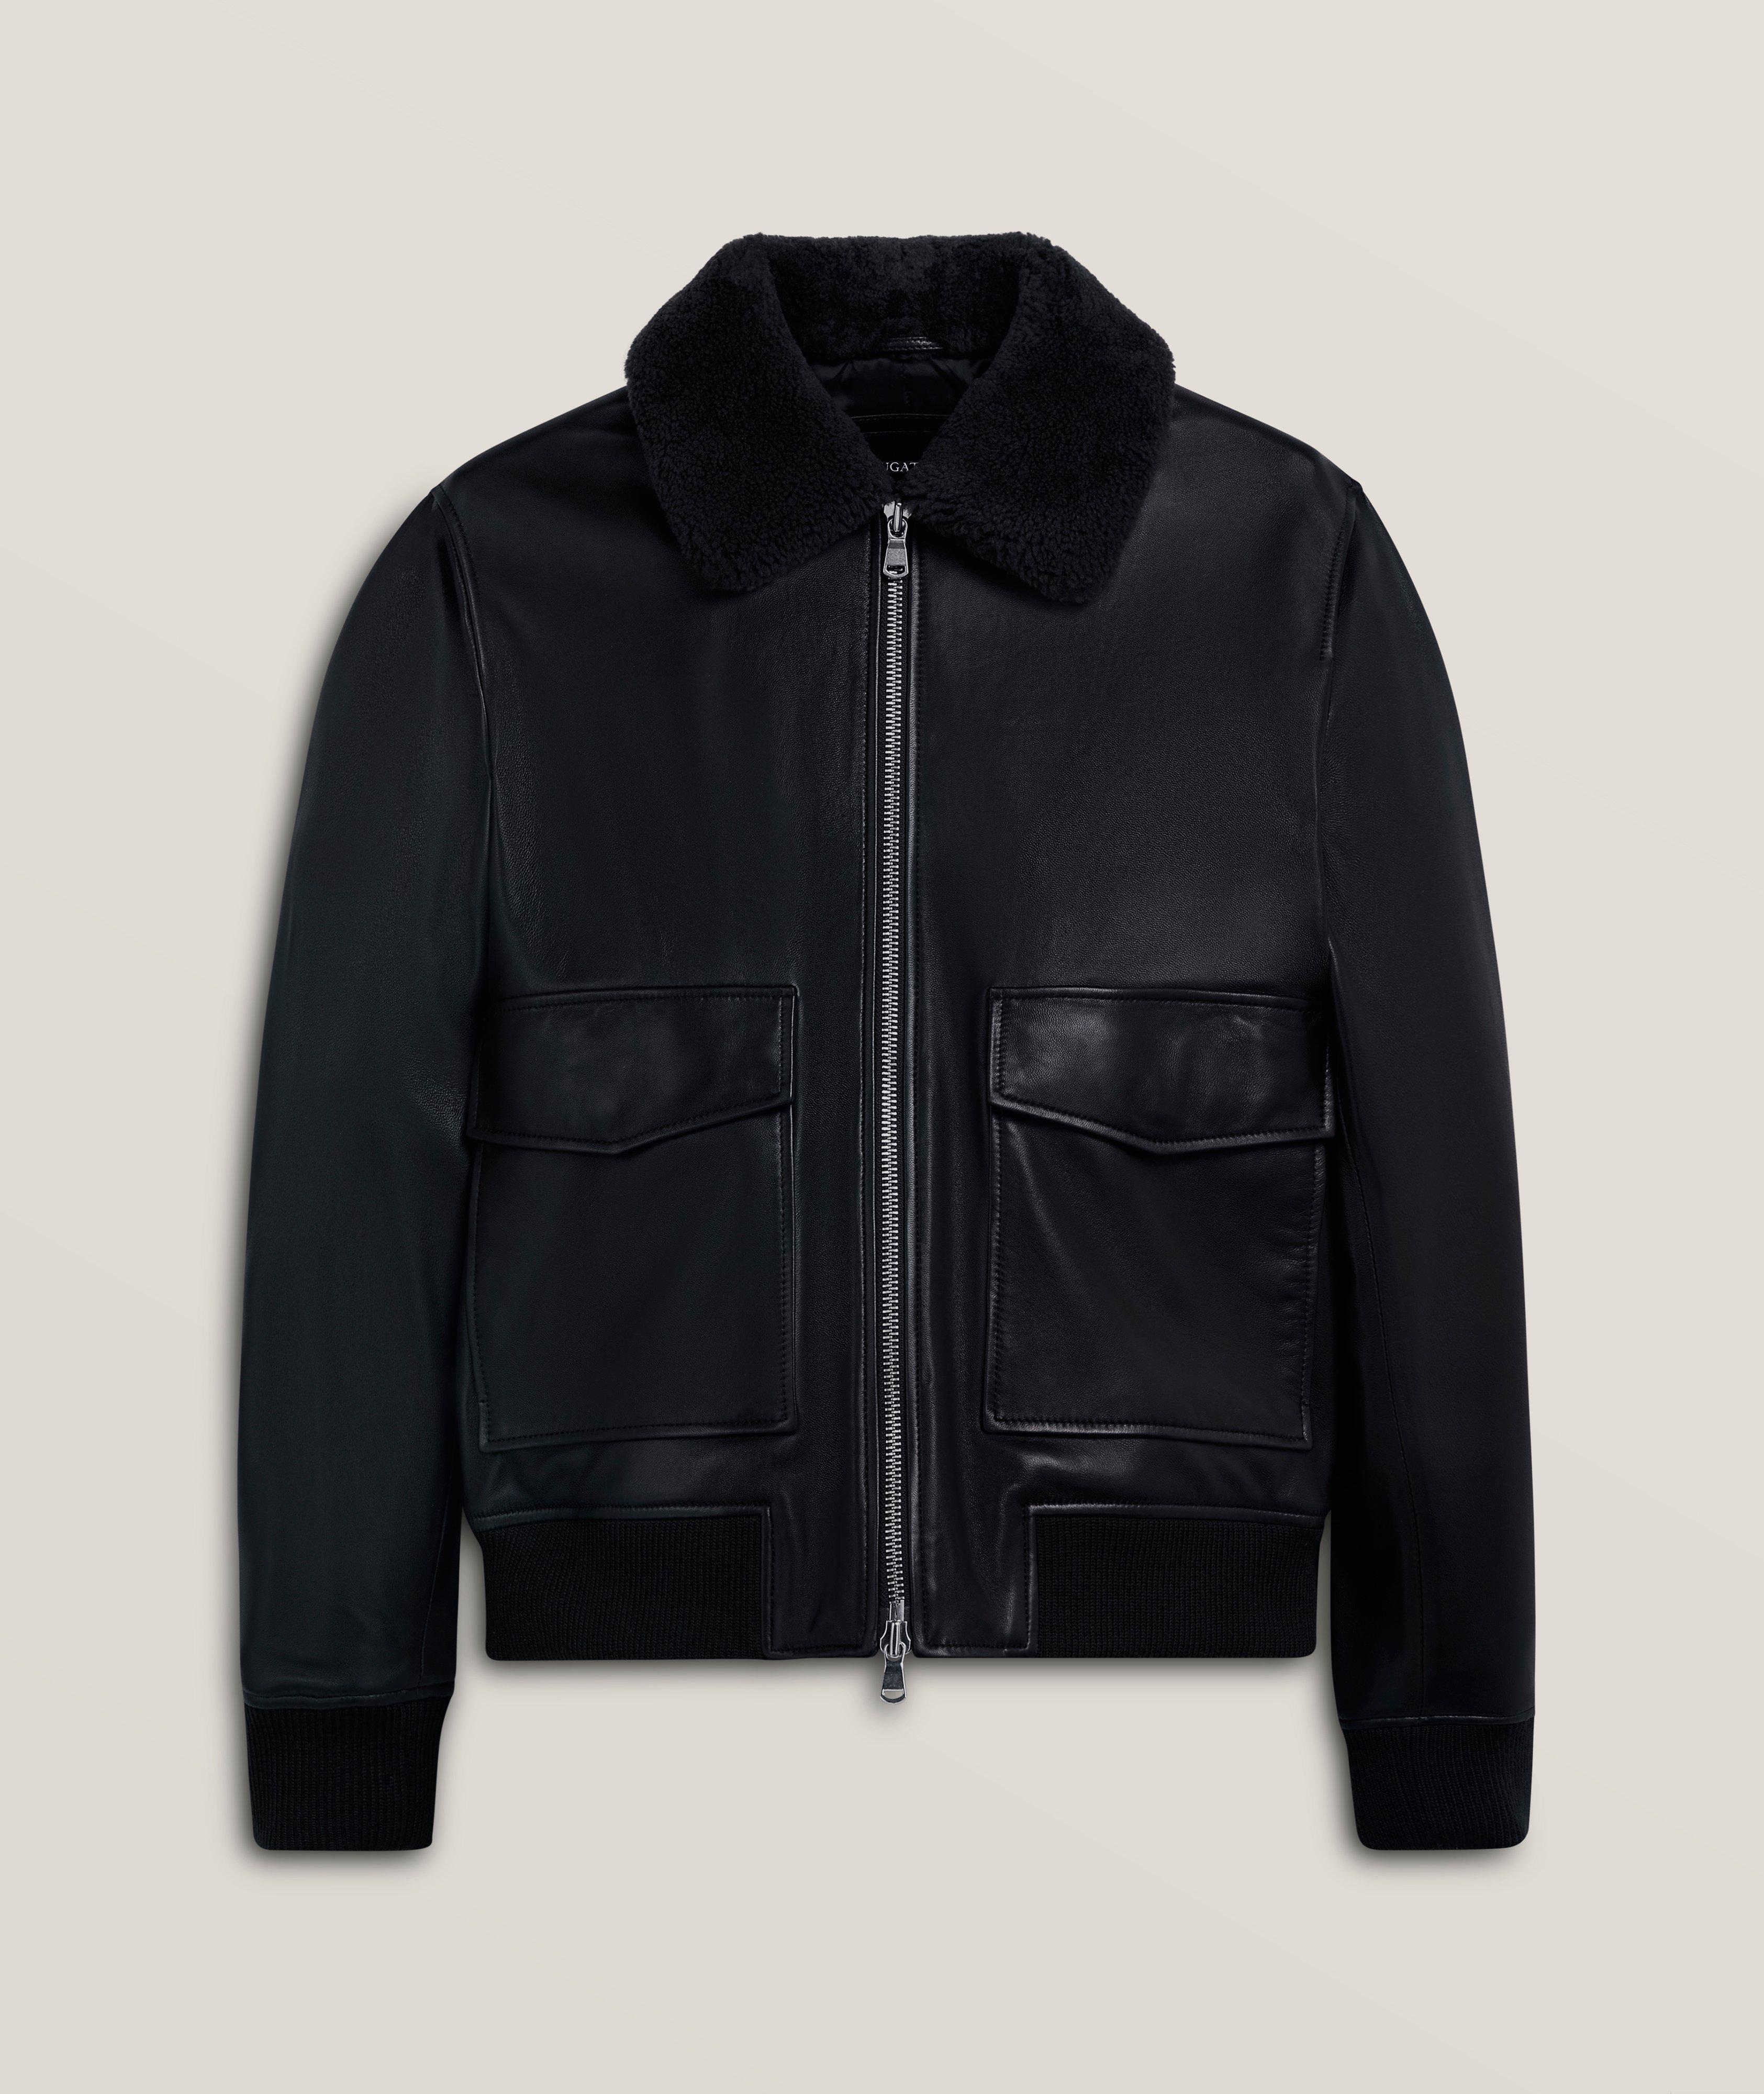 Removable Shearling Collar Leather Jacket image 0